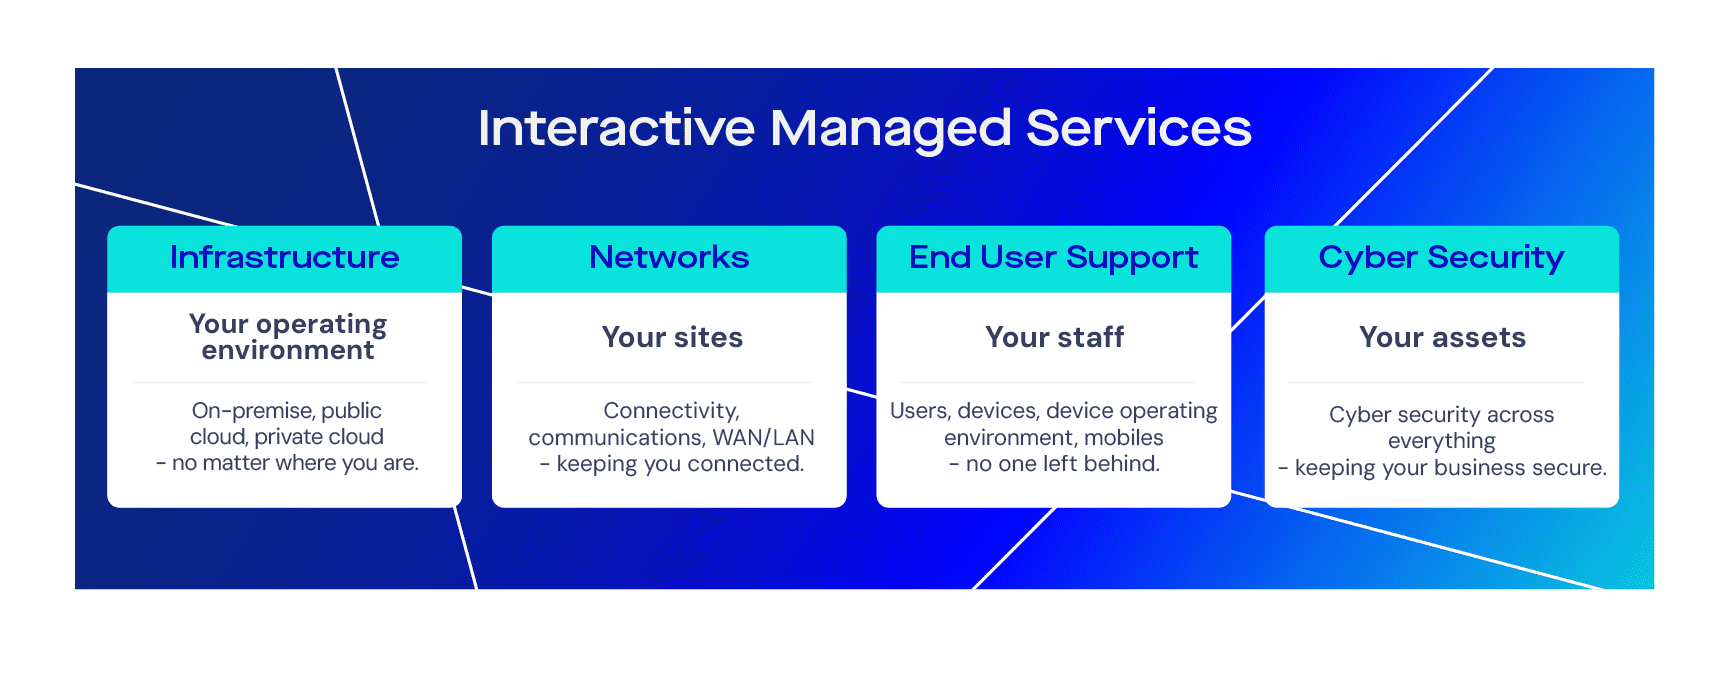 interactive managed services